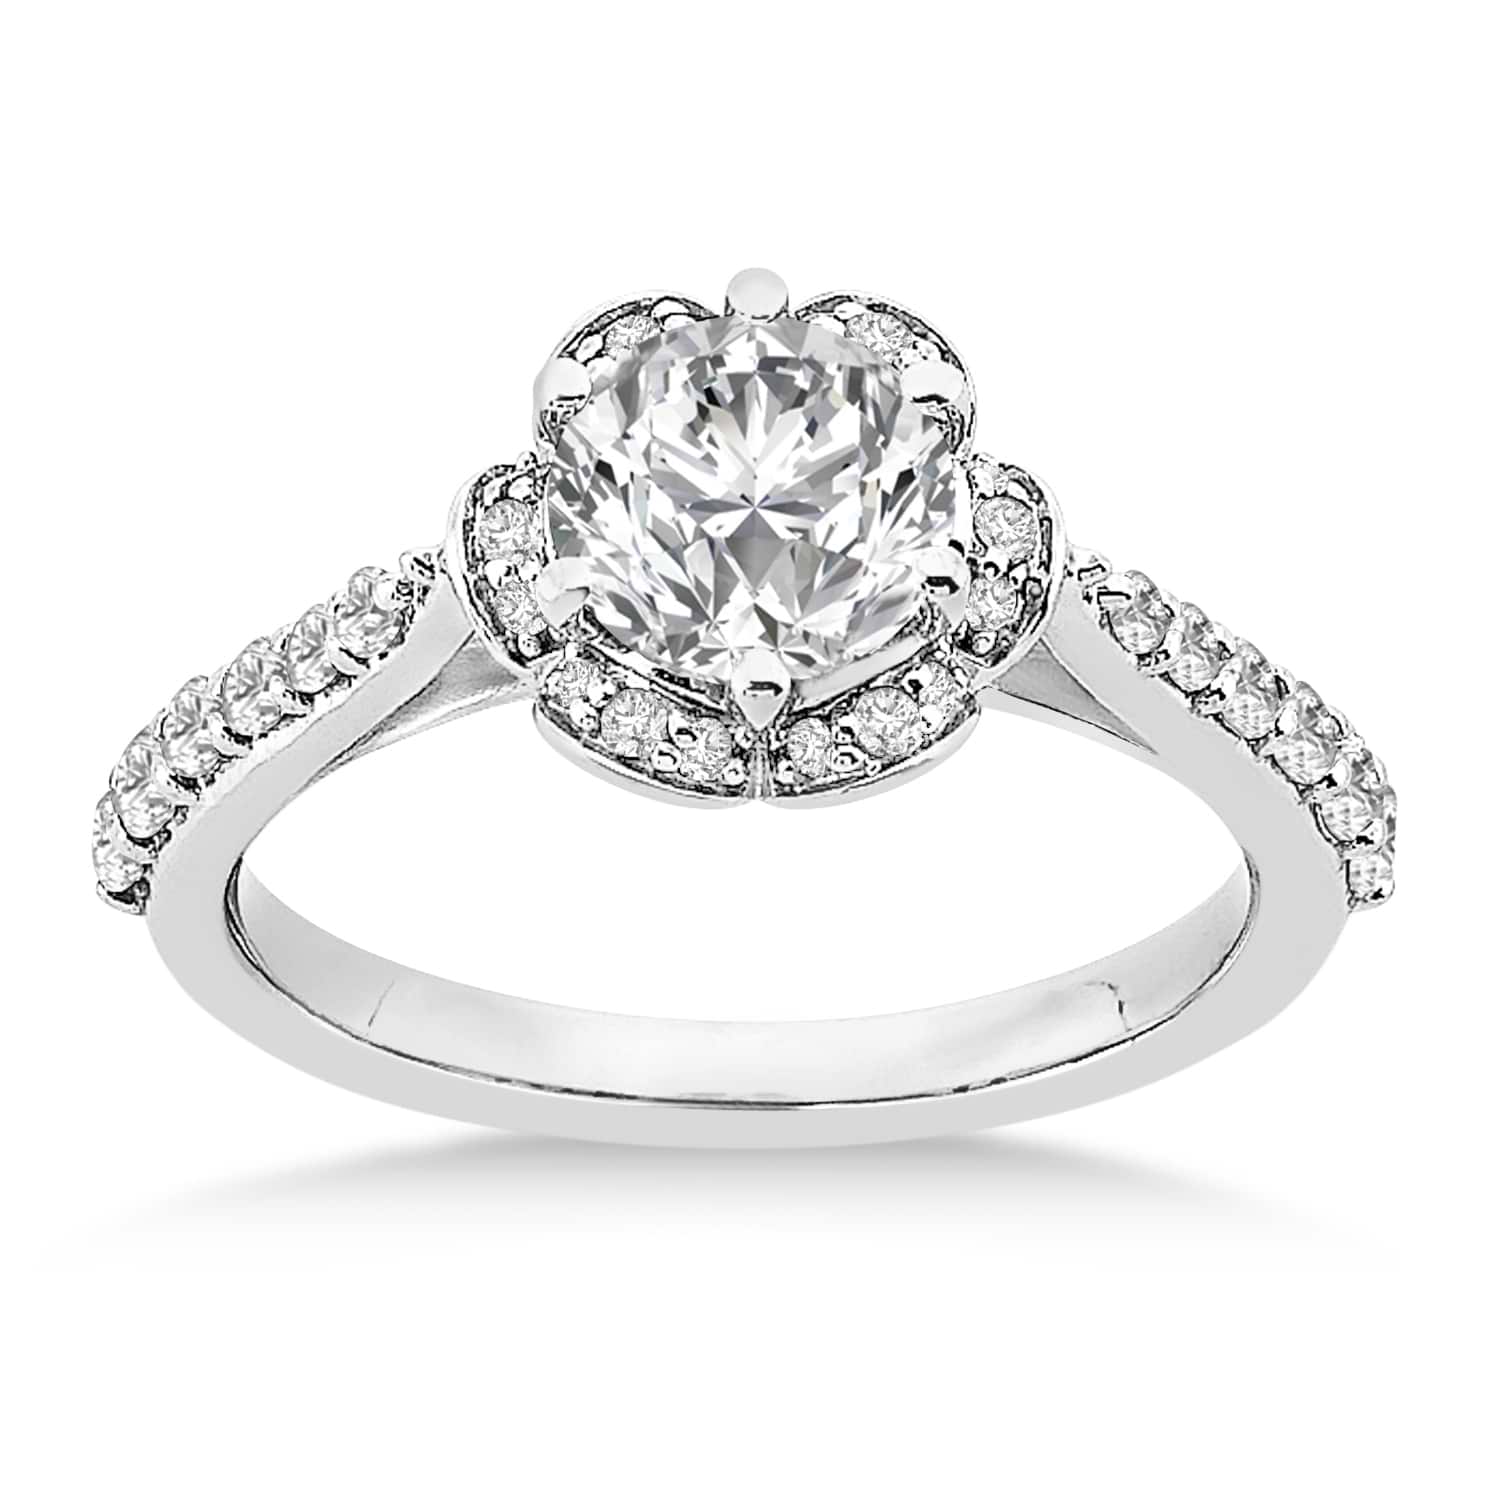 Diamond Accented Floral Halo Engagement Ring 14k White Gold (0.36ct)